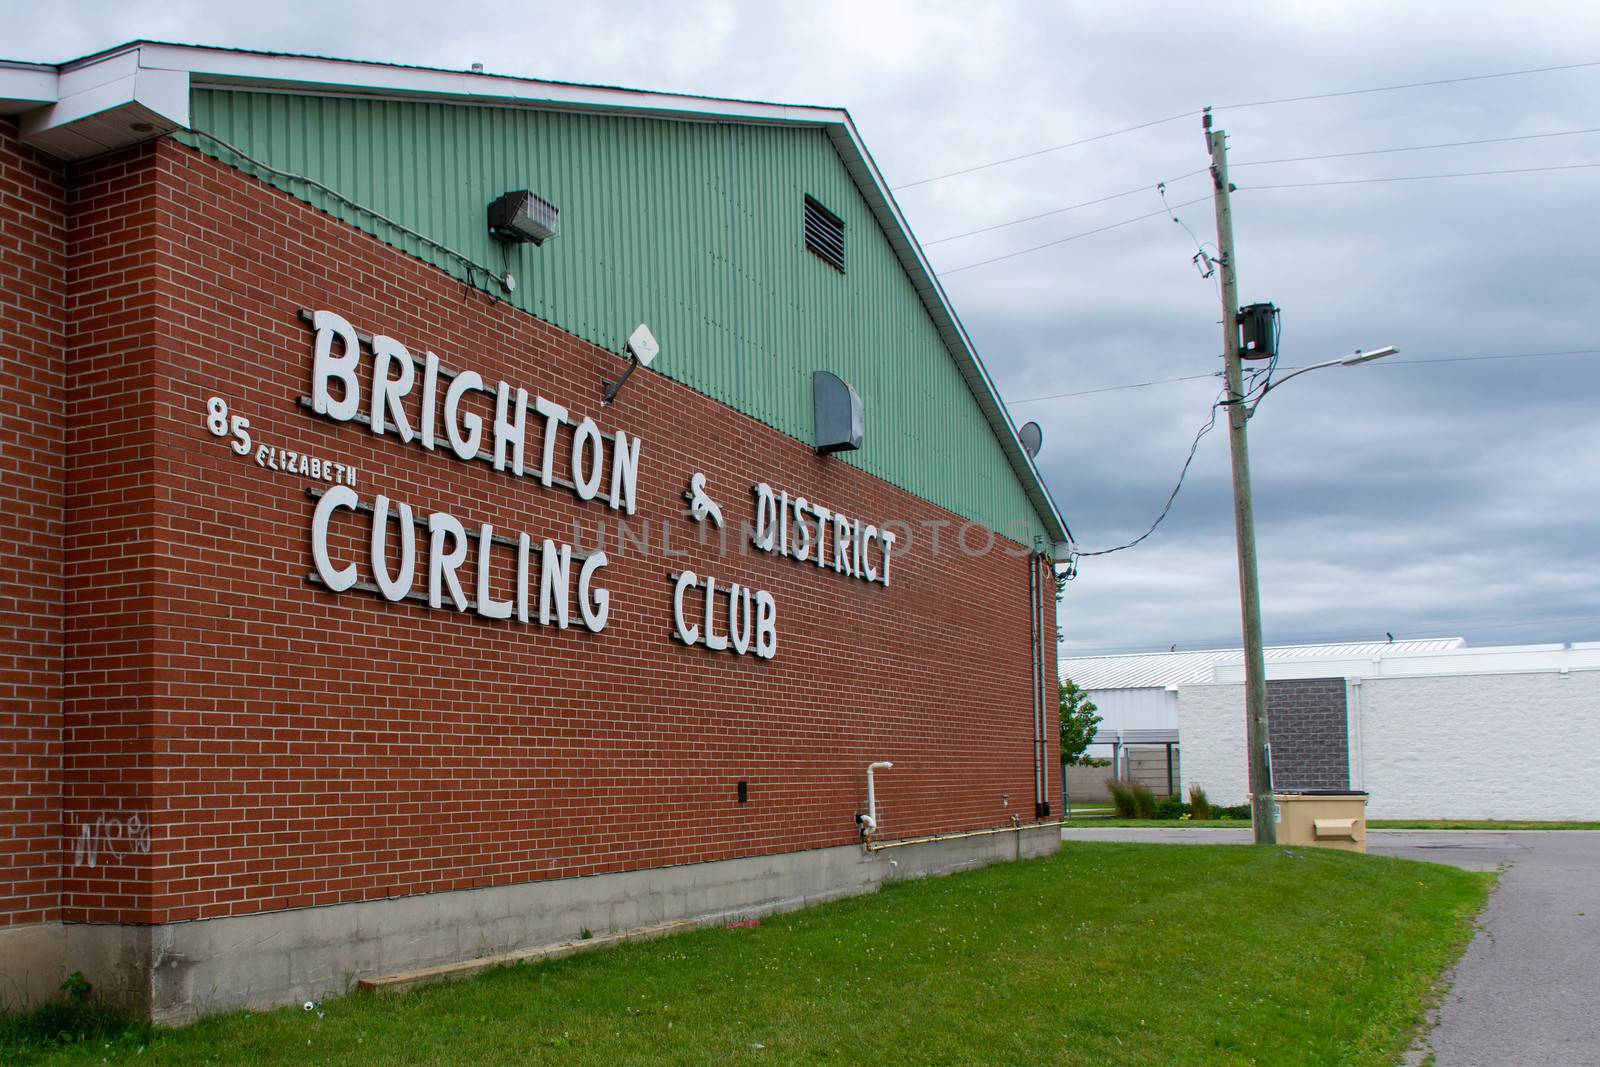 "Brighton, Ontario/Canada - 07/22/2019: Downtown rural sreet of small town Canadian city of Brighton near Pesquile Lake Provincial Park curling club sign and arena."